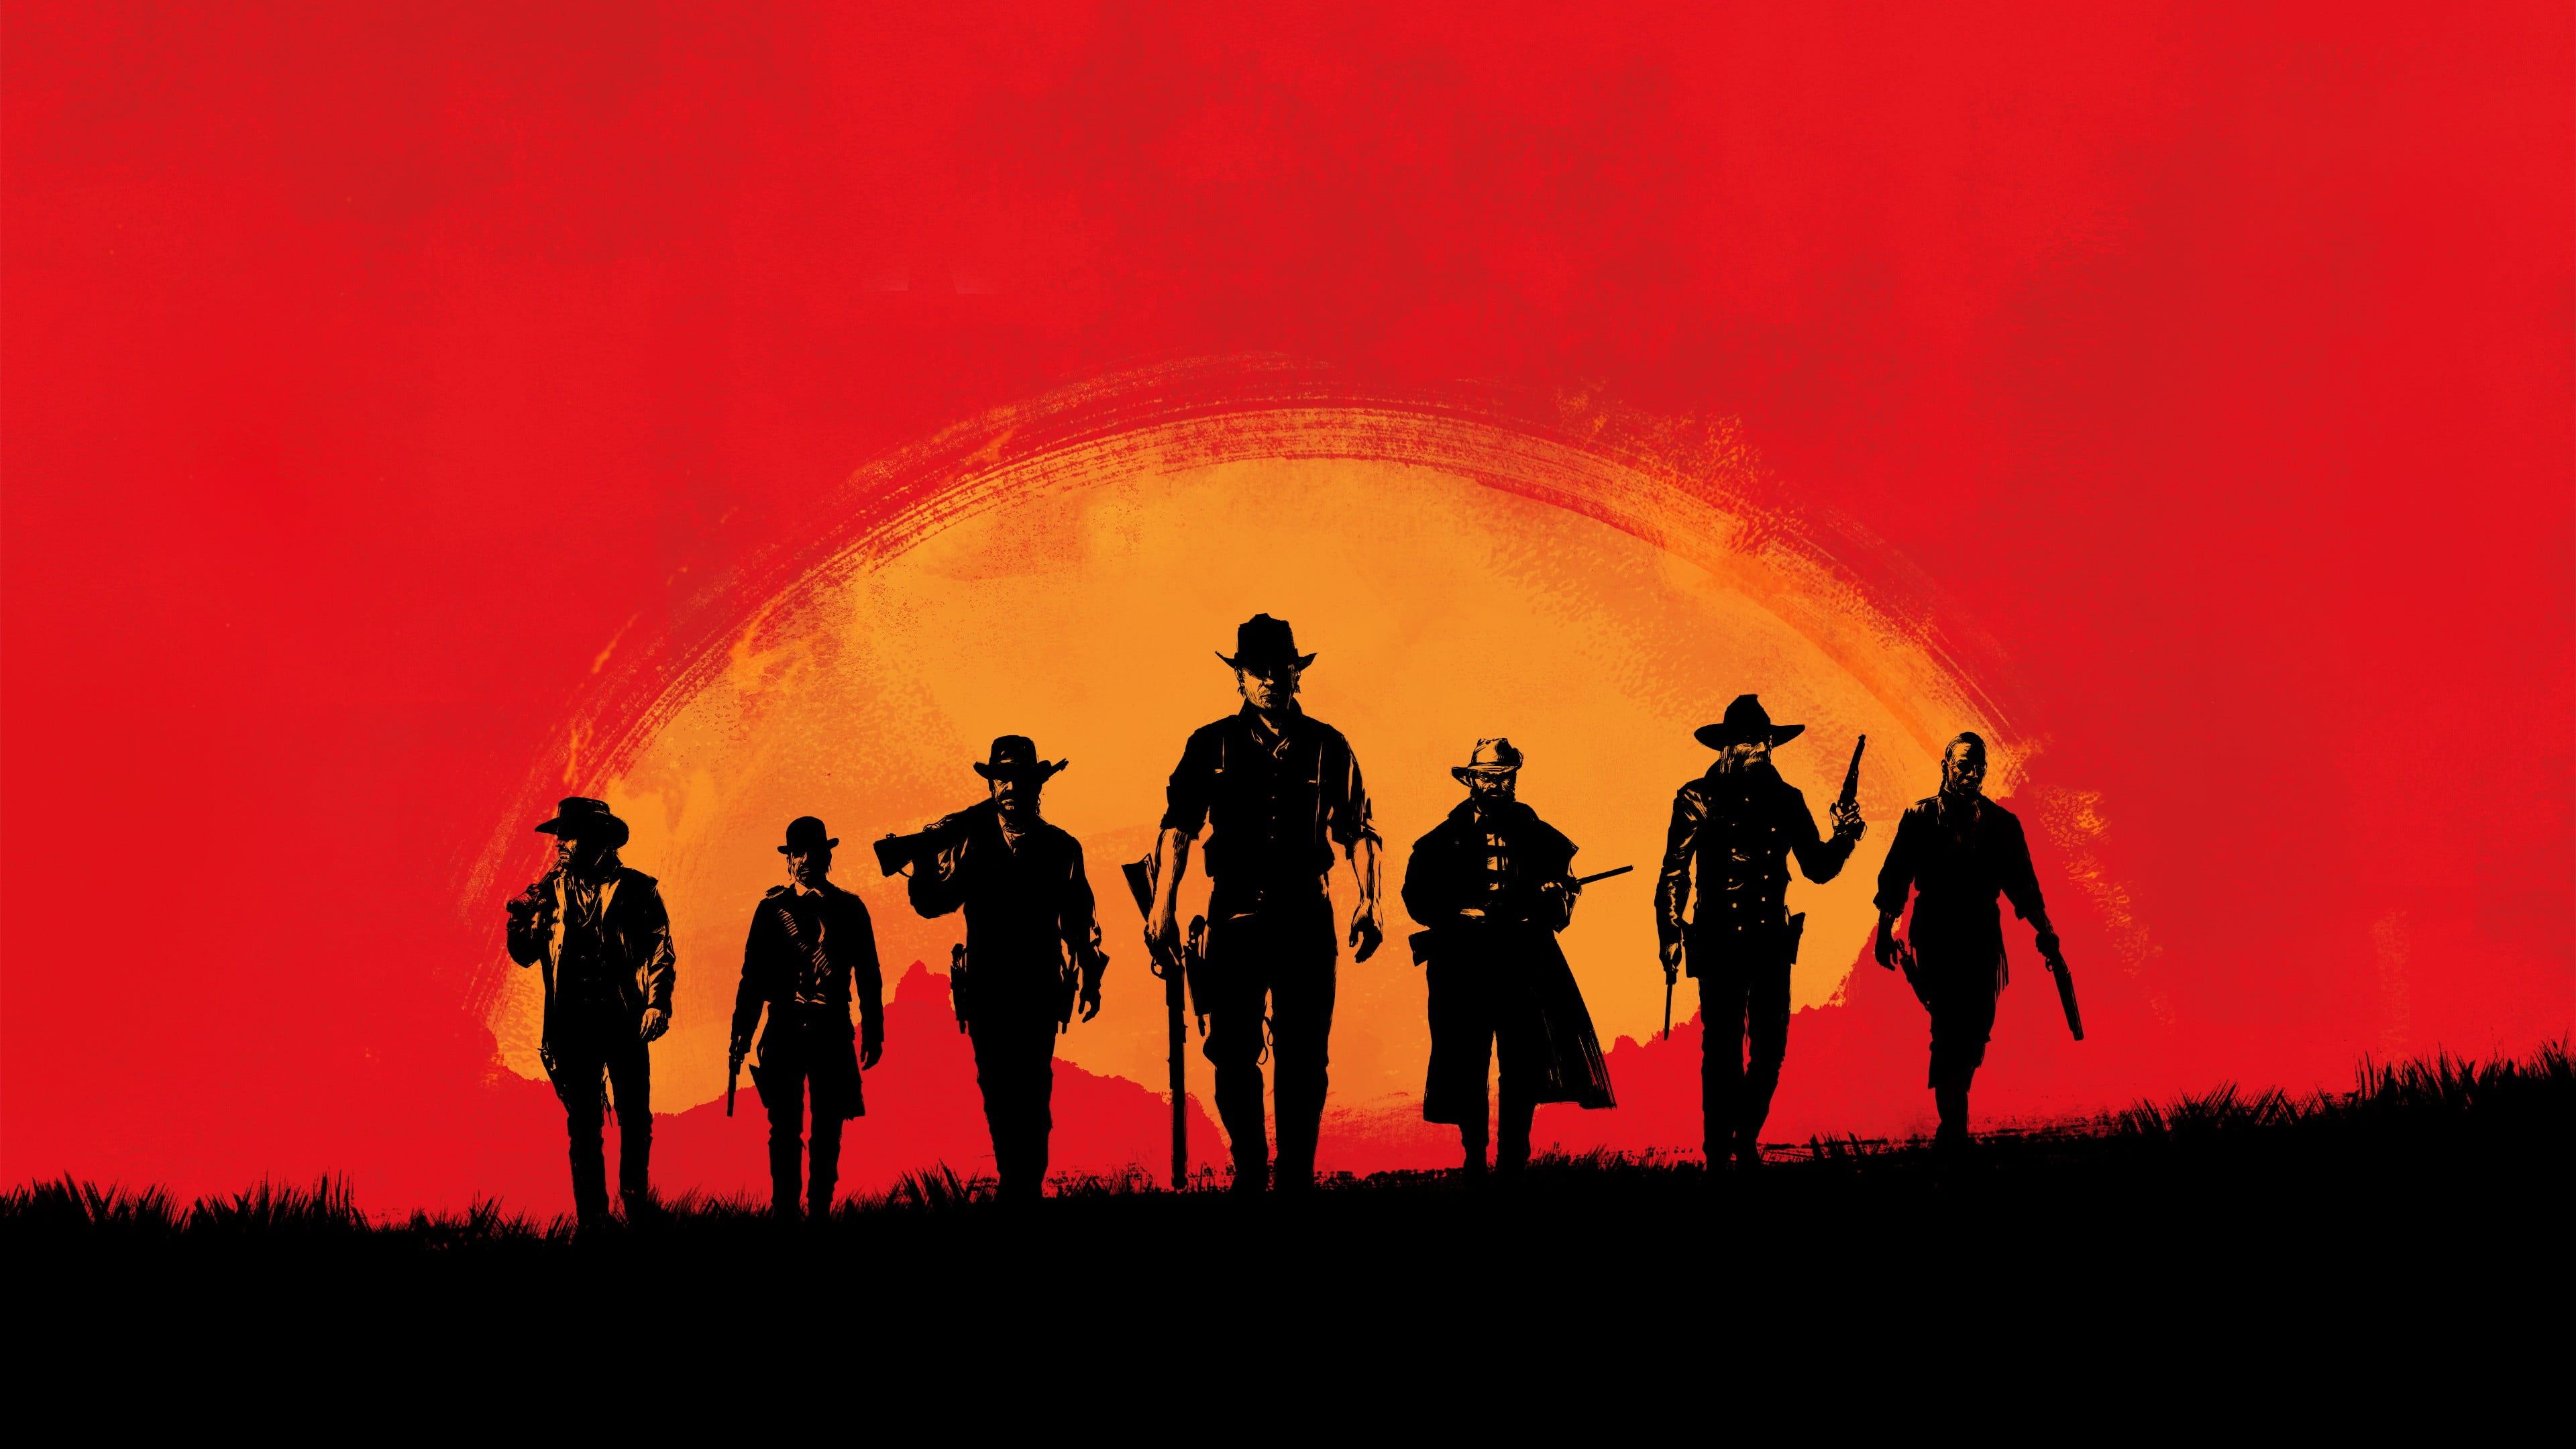 Yellow, red, and black group of men digital wallpaper, Red Dead